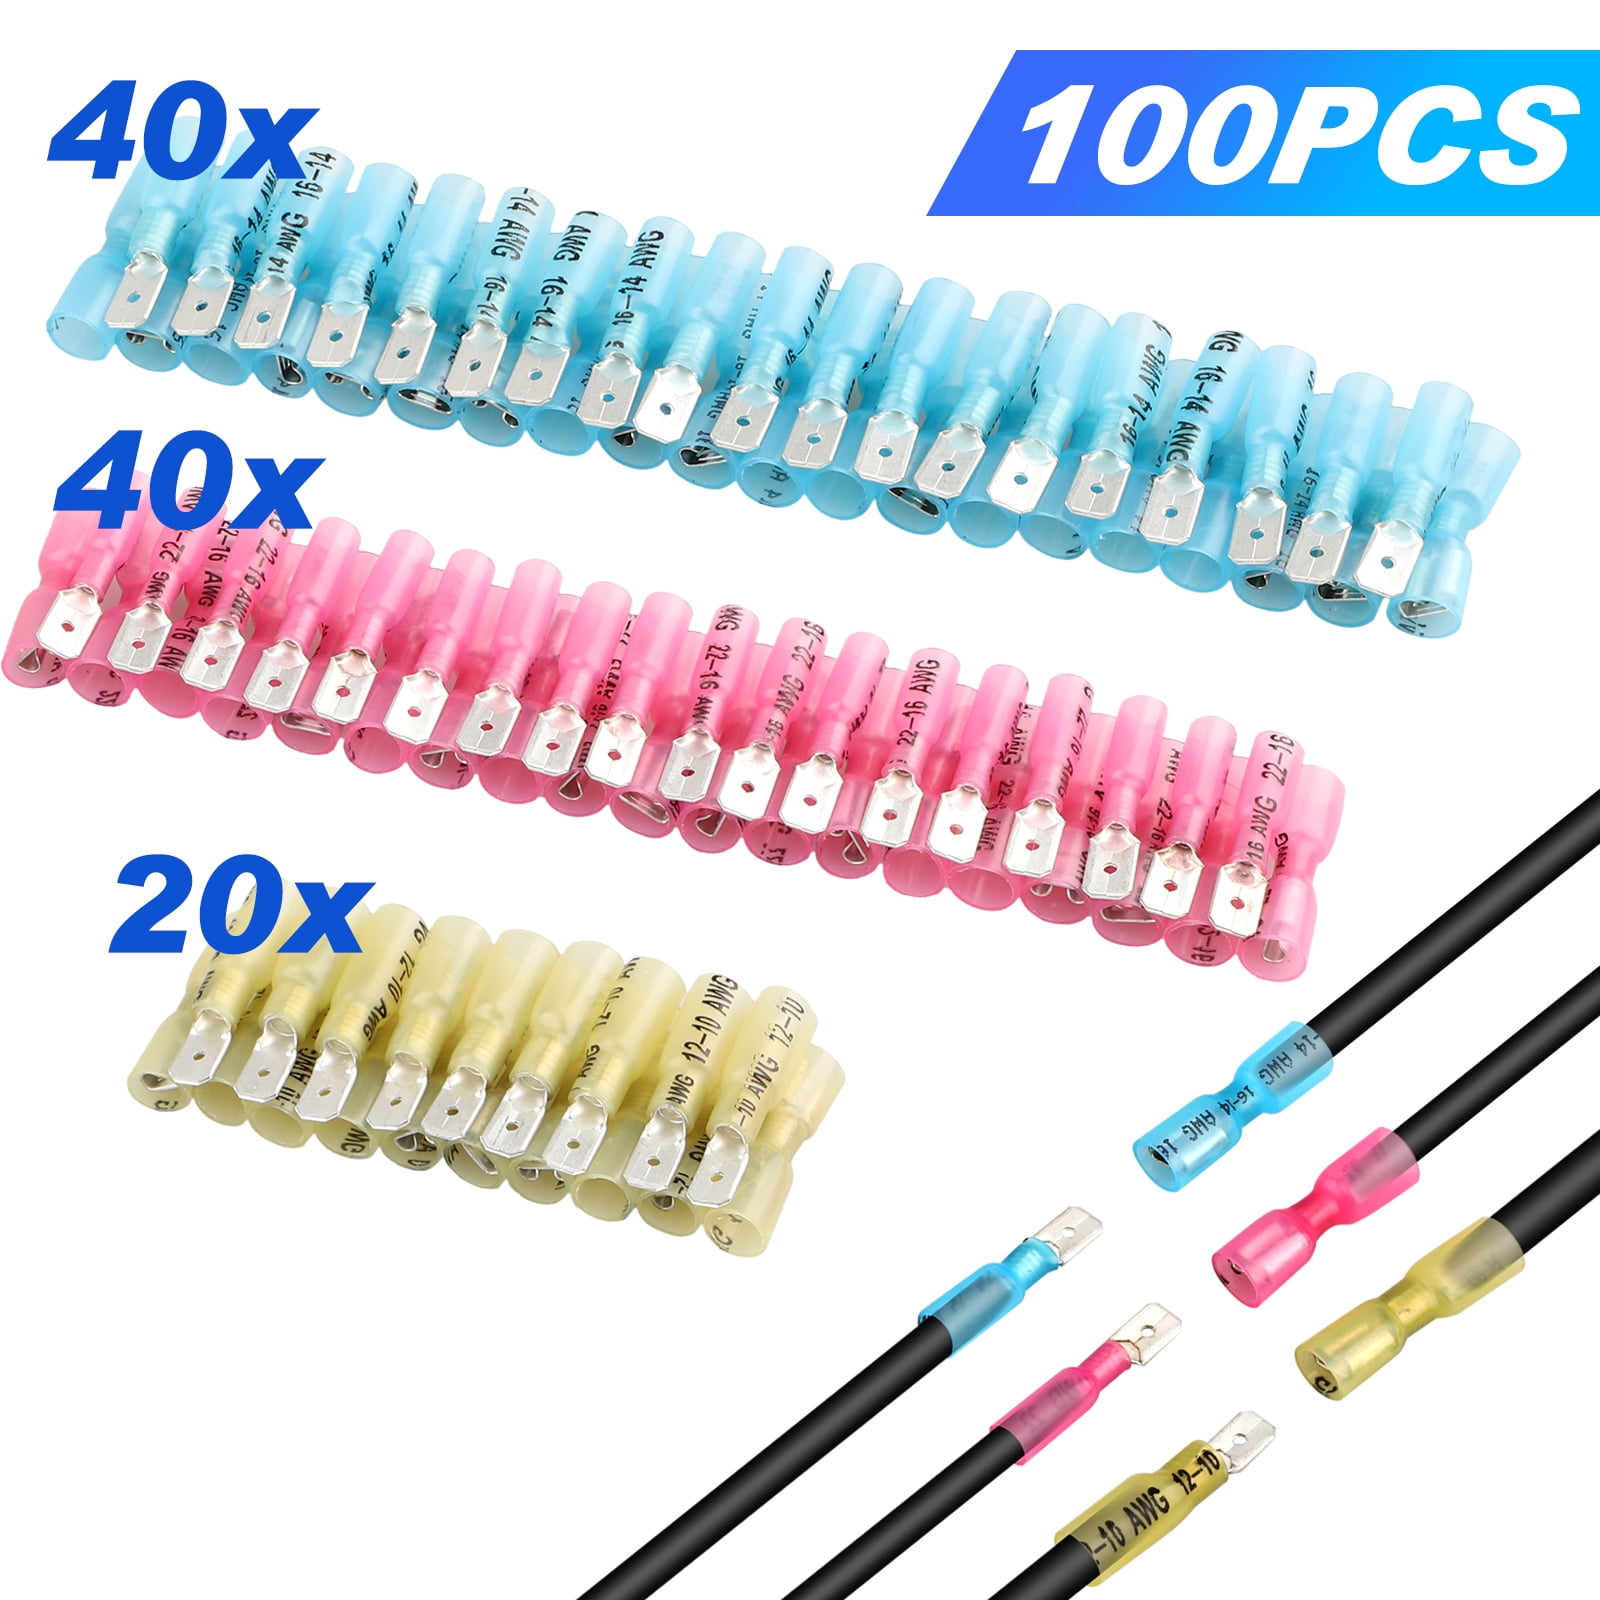 100pcs Heat Shrinkable Cable Connectors Insulated Cable Electrical Terminal Kit 